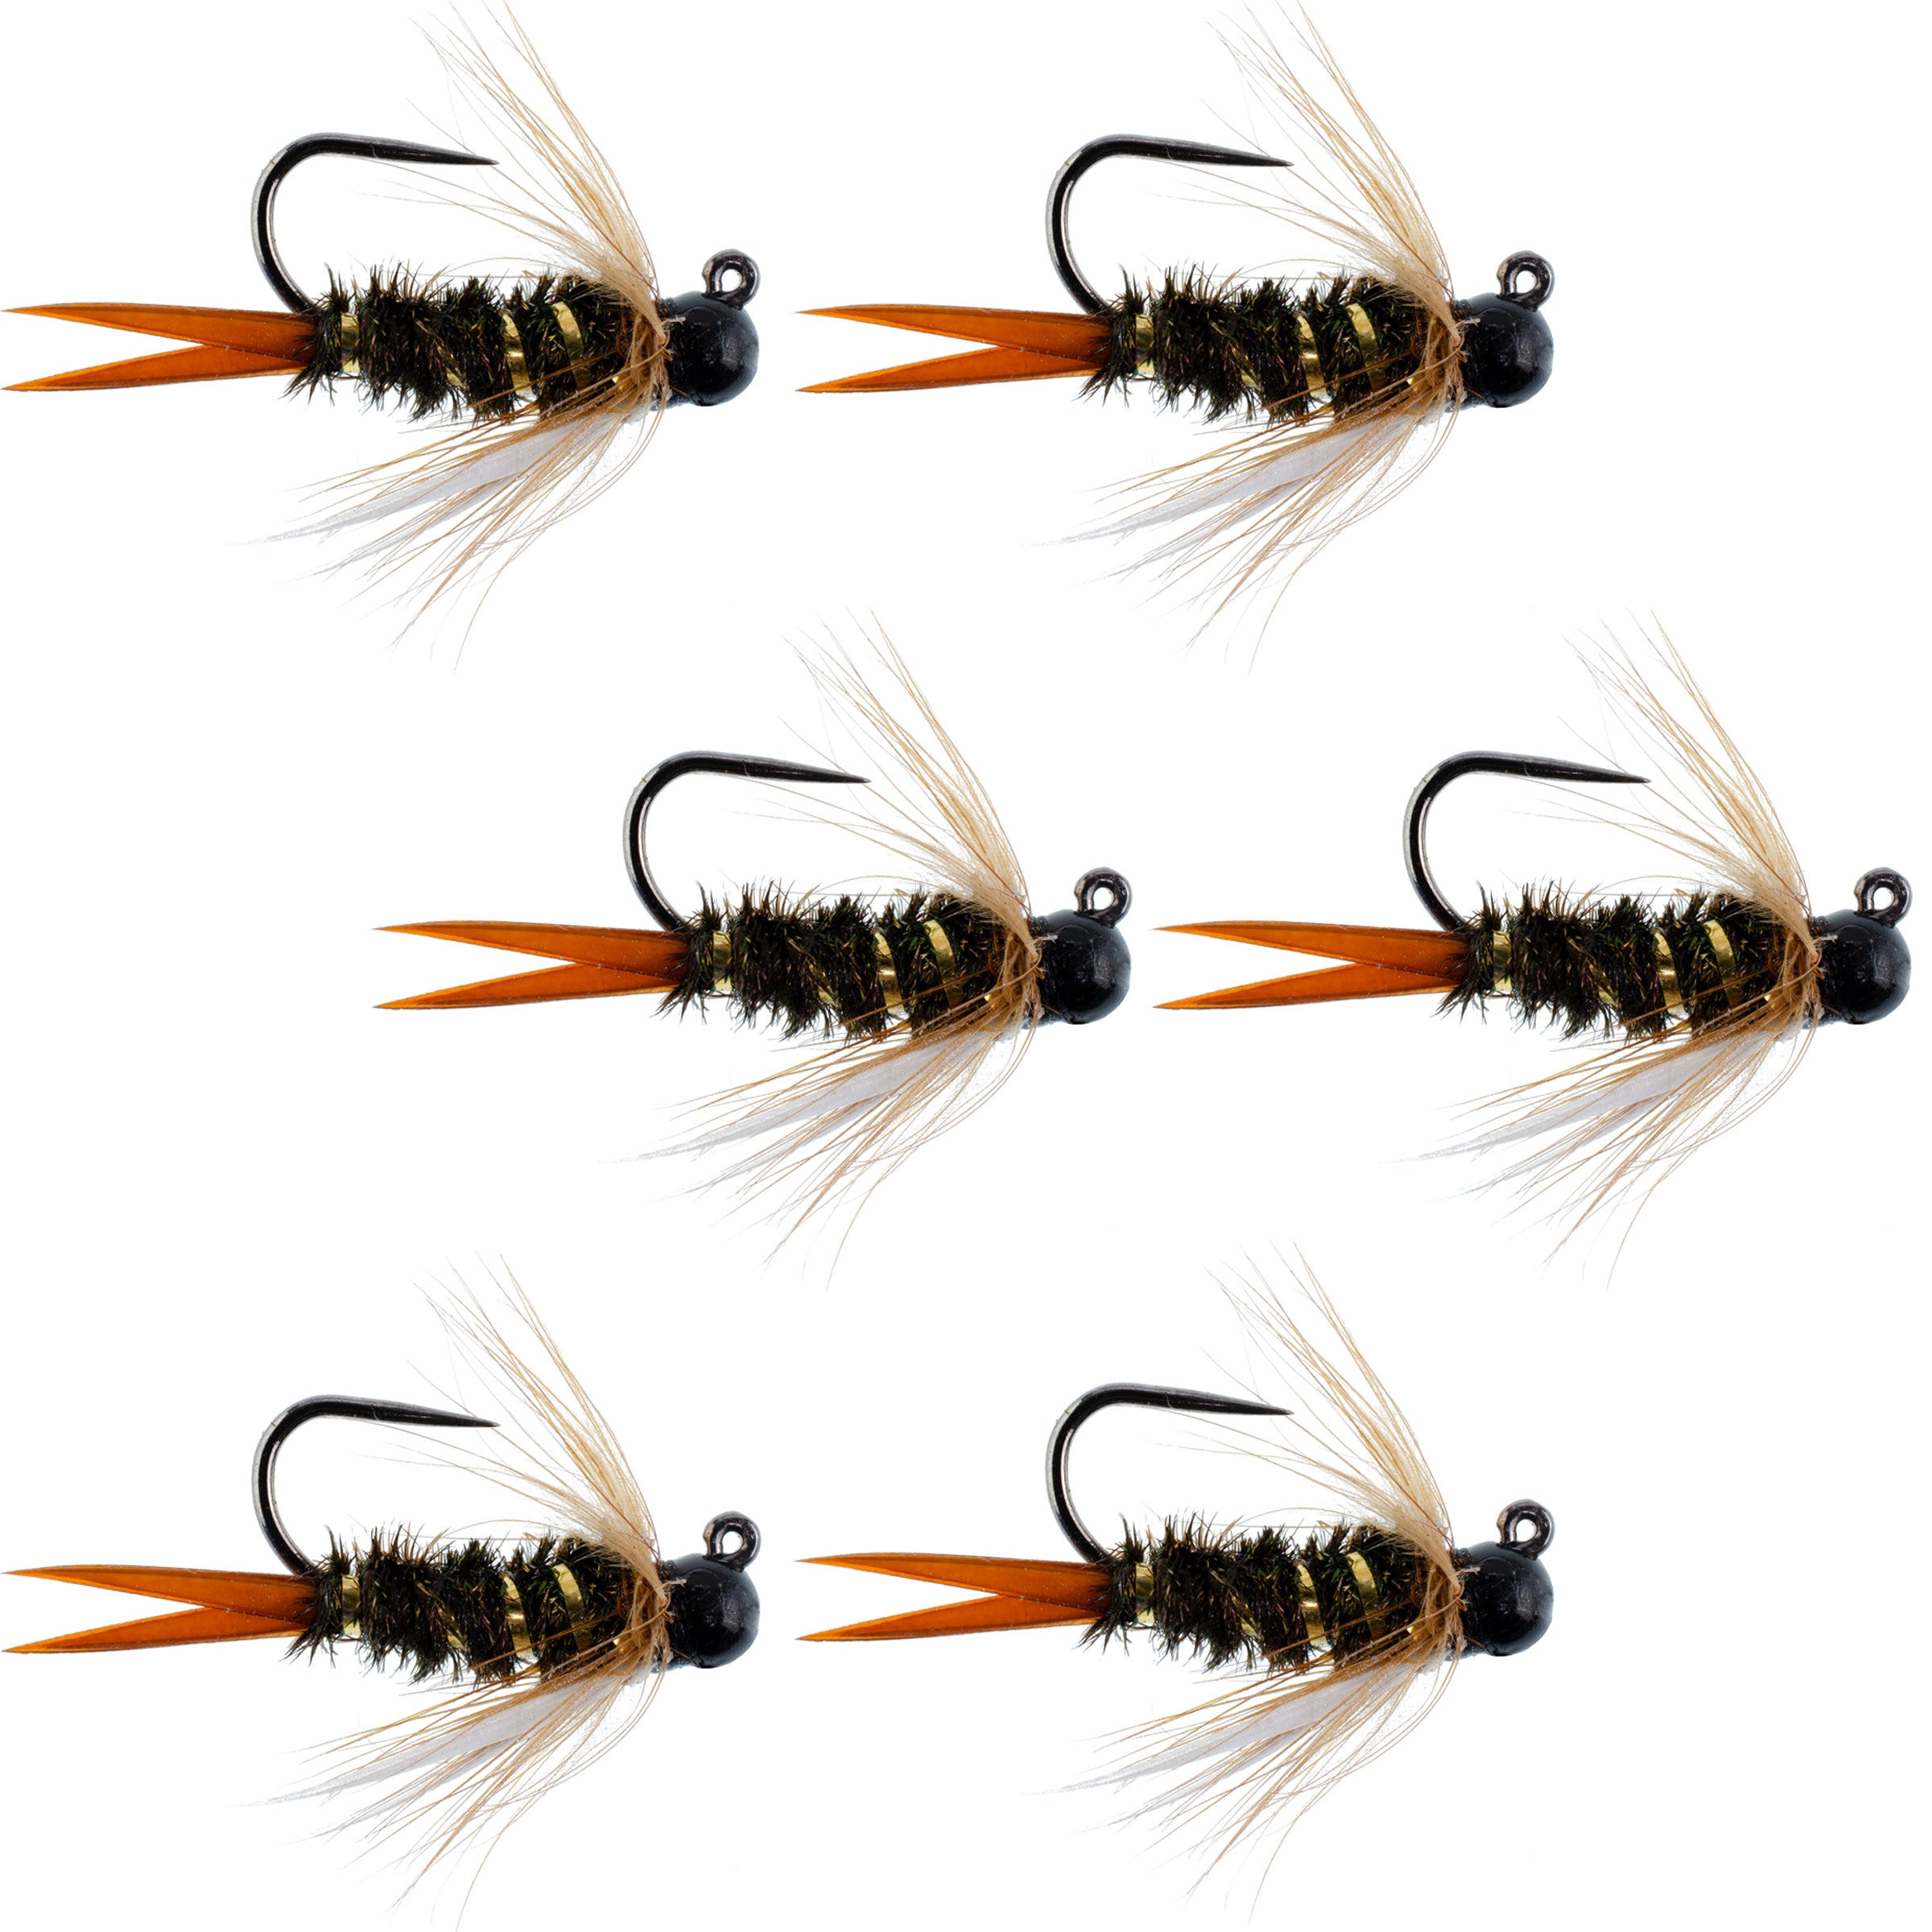 Black Tungsten Bead Prince Jig Tactical Czech Nymph Euro Nymphing Fly - 6 Flies Size 14